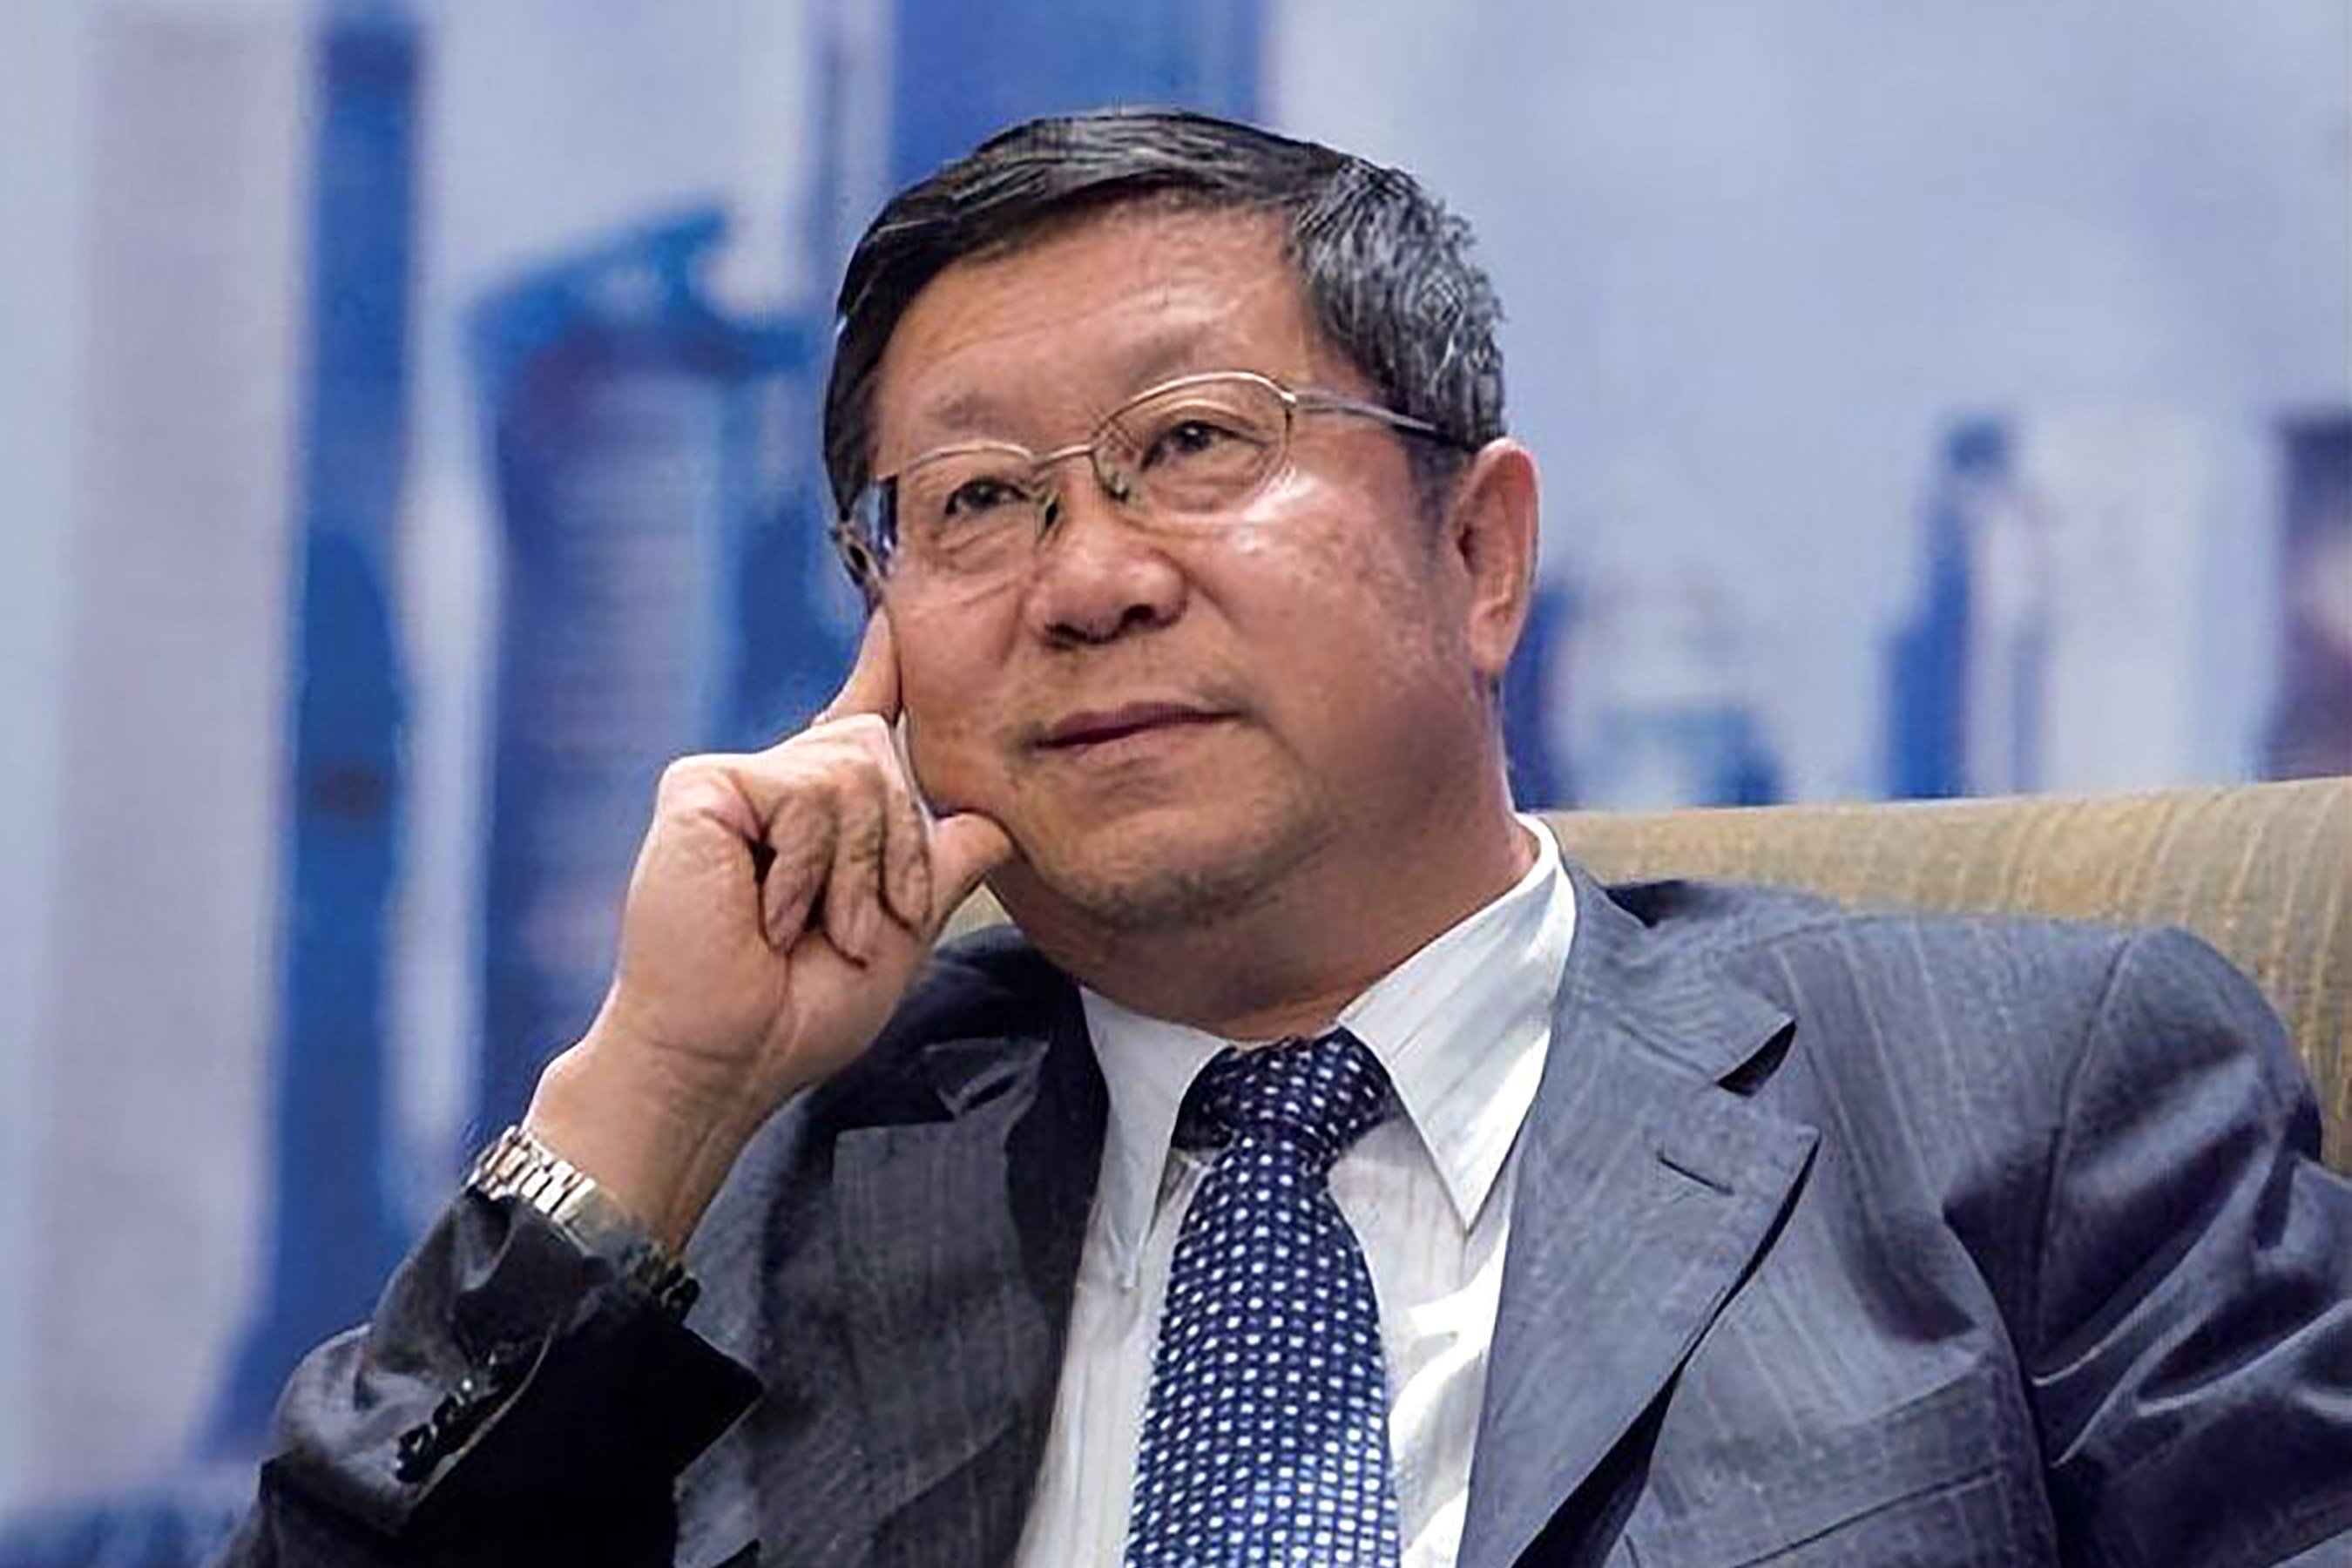 Tang Shuangning was chairman of state financial conglomerate China Everbright Group for a decade. Photo: Handout